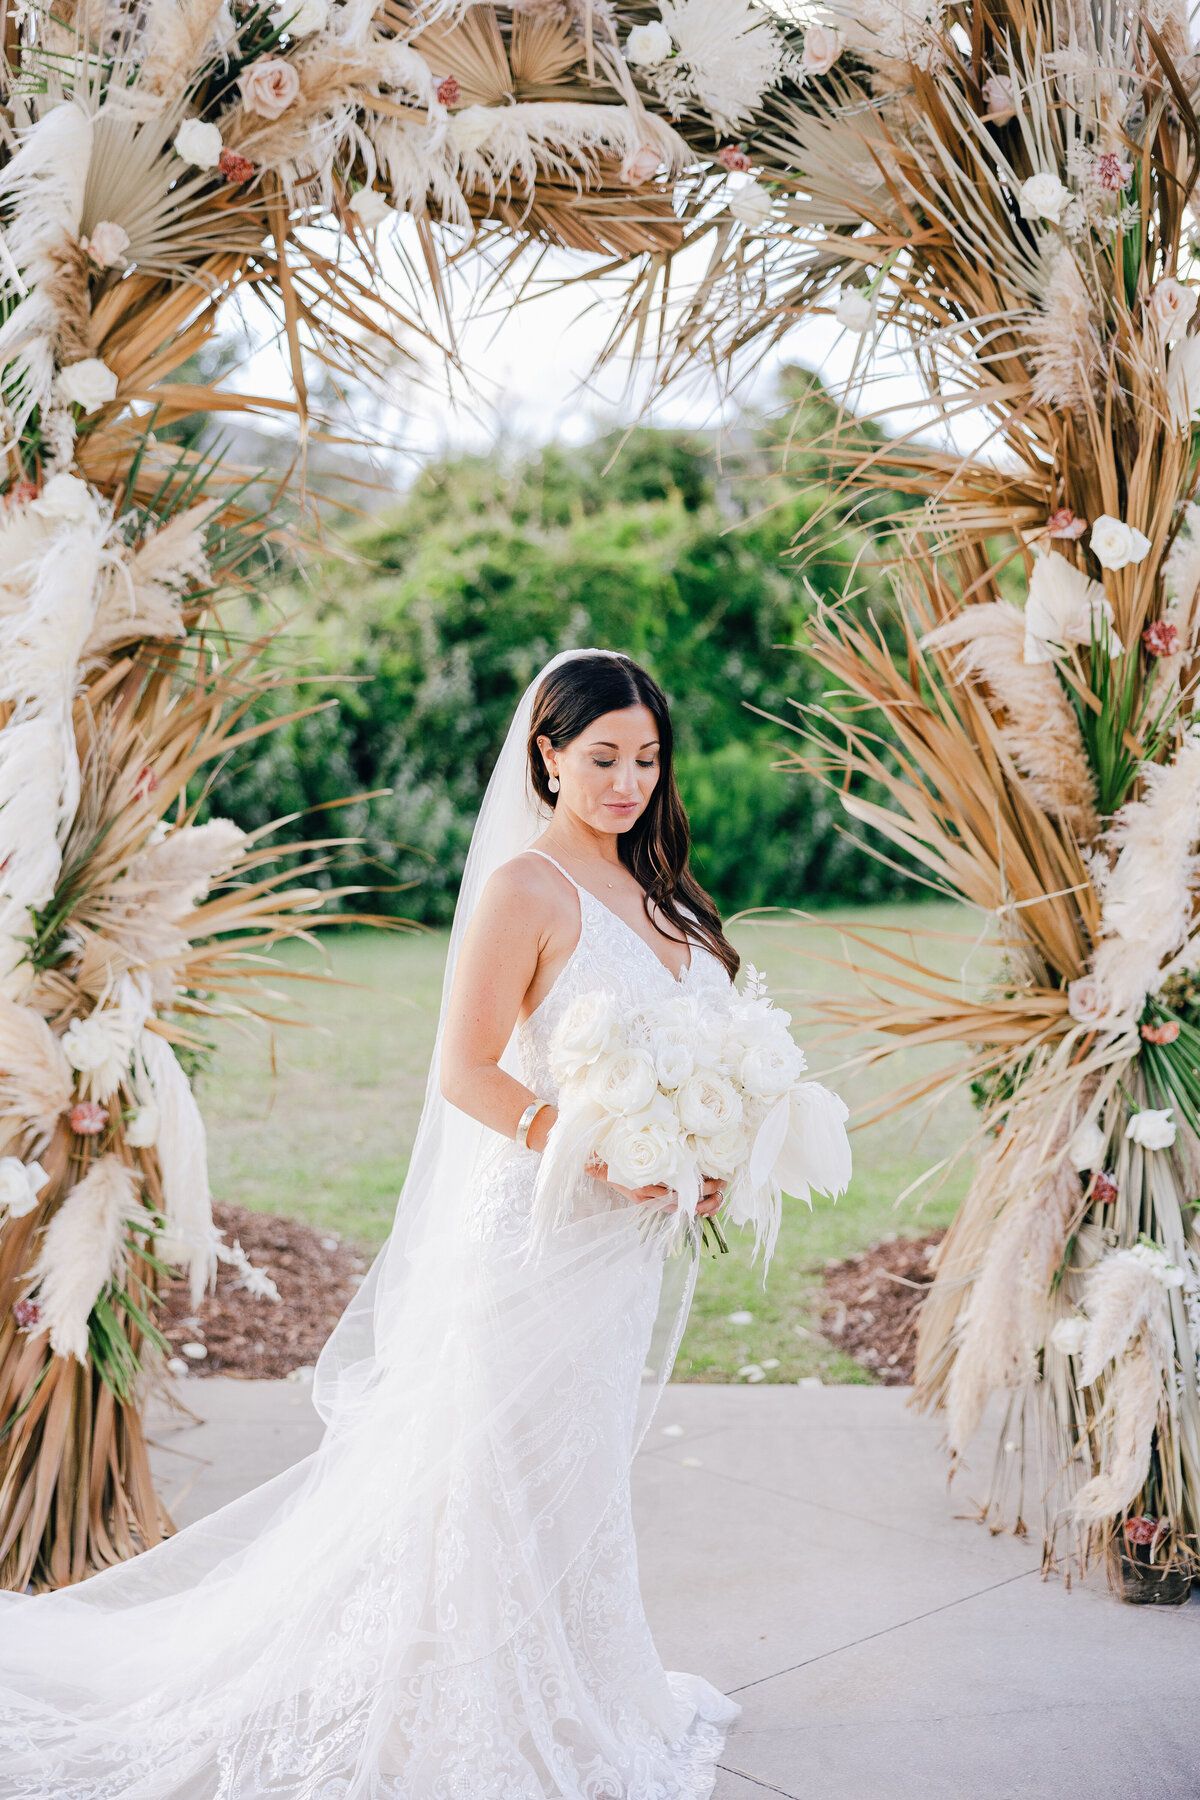 Bride in white dress holding a bouquet under a floral archway, captured by a Destination Wedding Photographer.